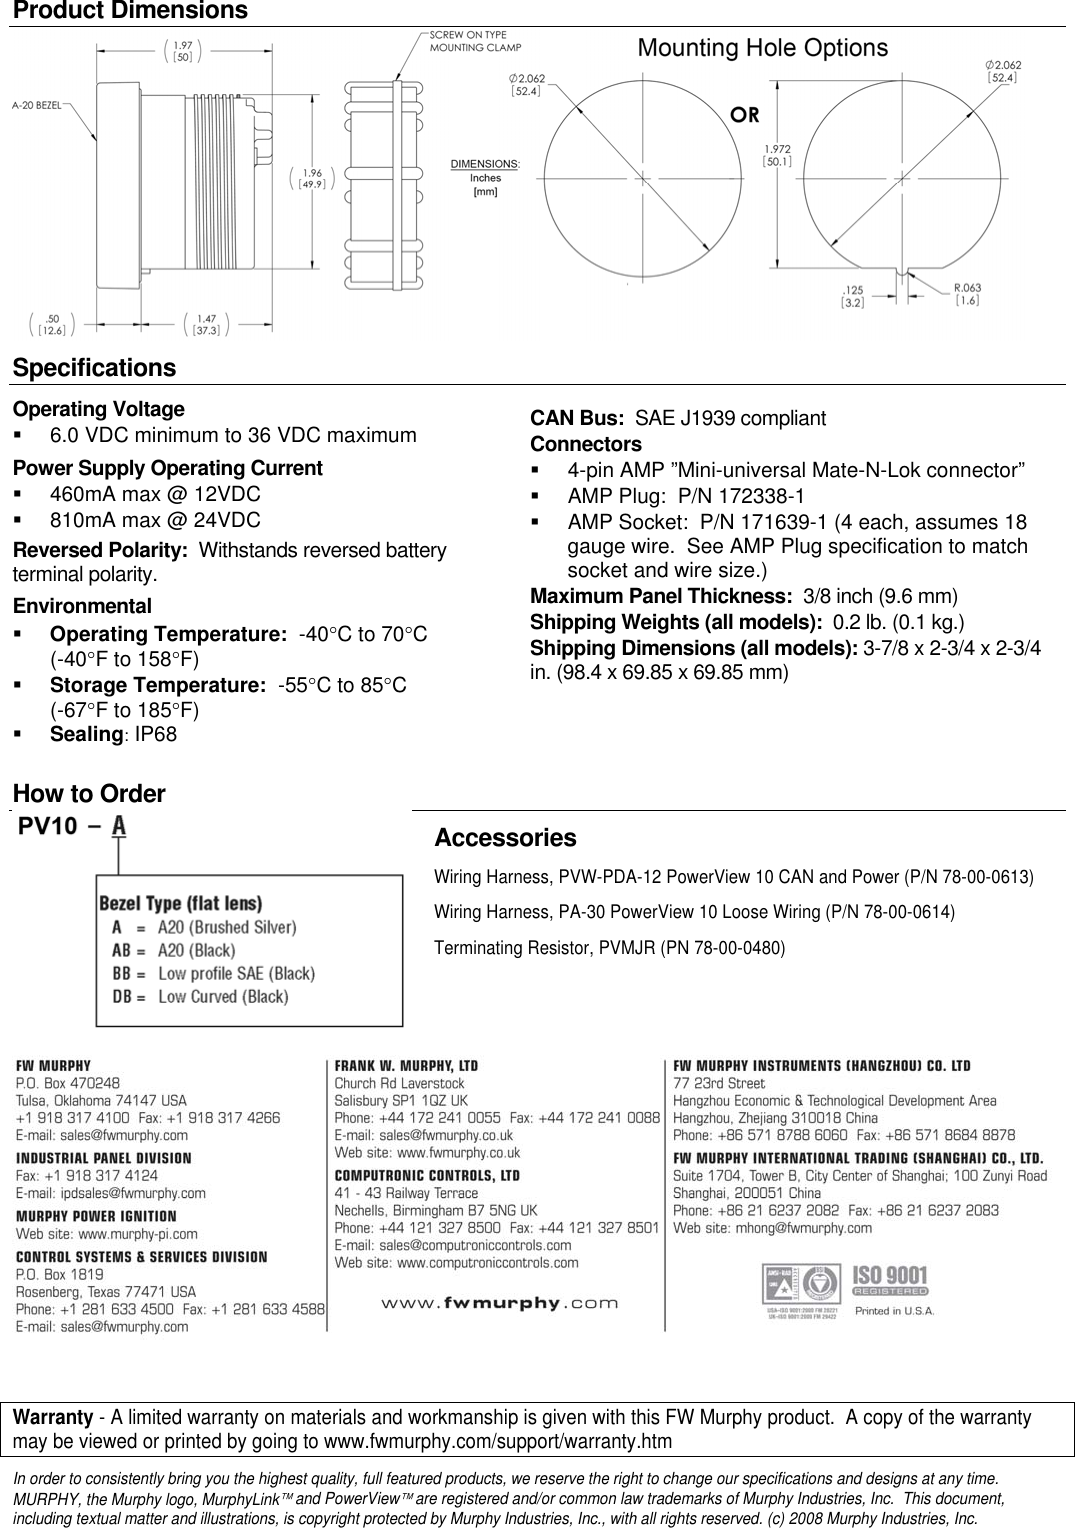 Page 2 of 2 - Murphy Murphy-Diagnostic-Display-Pv10-Users-Manual 0810305 - PV10-bulletin